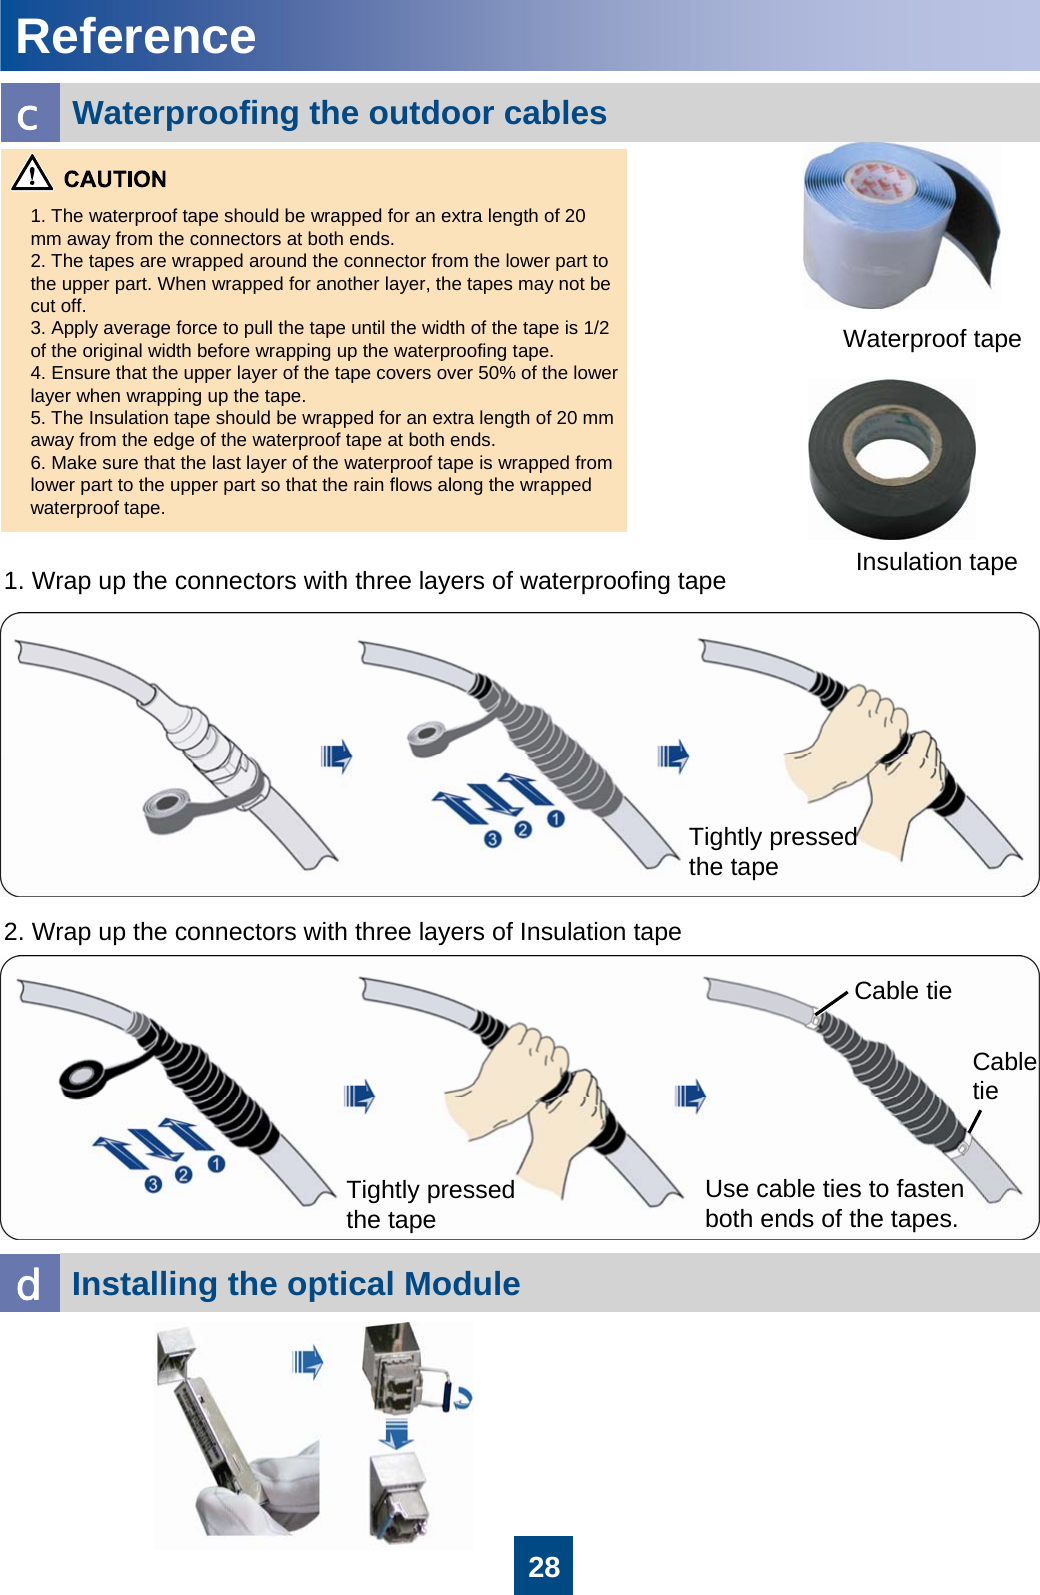 281. The waterproof tape should be wrapped for an extra length of 20 mm away from the connectors at both ends. 2. The tapes are wrapped around the connector from the lower part to the upper part. When wrapped for another layer, the tapes may not be cut off.3. Apply average force to pull the tape until the width of the tape is 1/2 of the original width before wrapping up the waterproofing tape.4. Ensure that the upper layer of the tape covers over 50% of the lower layer when wrapping up the tape.5. The Insulation tape should be wrapped for an extra length of 20 mm away from the edge of the waterproof tape at both ends.6. Make sure that the last layer of the waterproof tape is wrapped from lower part to the upper part so that the rain flows along the wrapped waterproof tape.Waterproof tapeInsulation tape1. Wrap up the connectors with three layers of waterproofing tape2. Wrap up the connectors with three layers of Insulation tapeTightly pressed the tapeTightly pressed the tapeUse cable ties to fasten both ends of the tapes.Cable tieCable tieWaterproofing the outdoor cablescReferenceInstalling the optical Module d